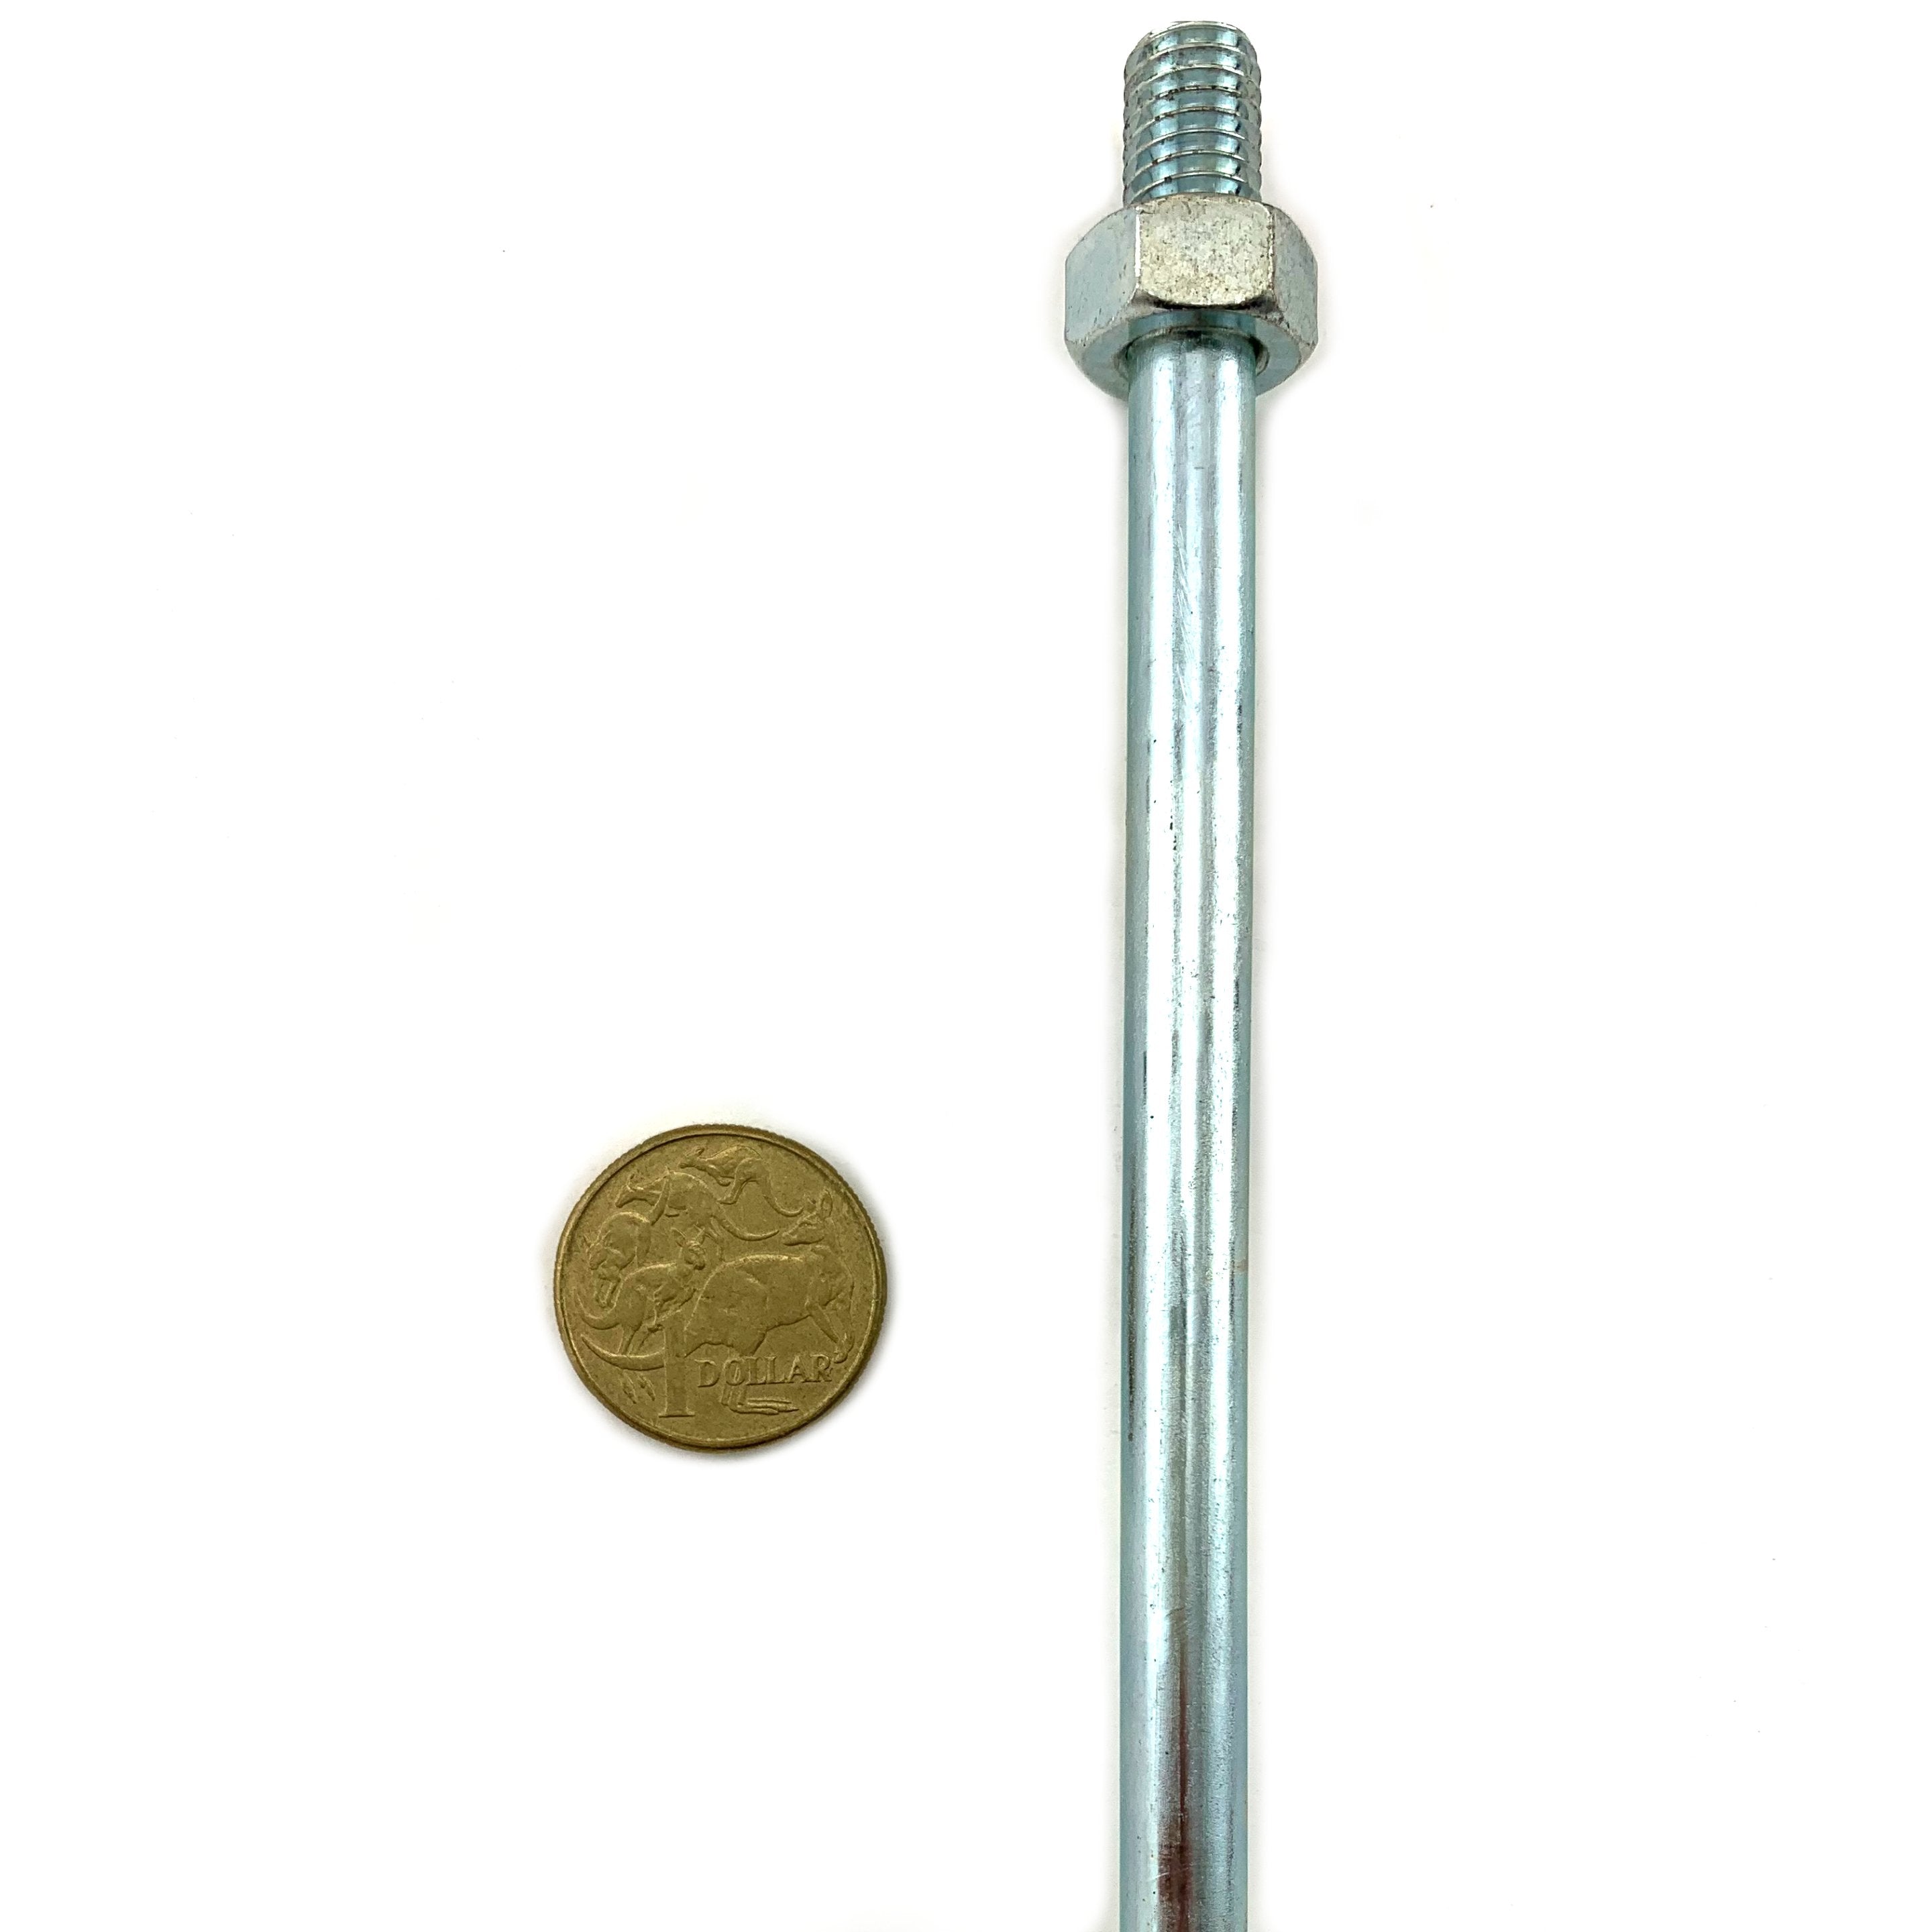 Threaded rod, zinc plated, 10mm thread, 9mm wire. Includes 2 nuts. Melbourne, Australia.